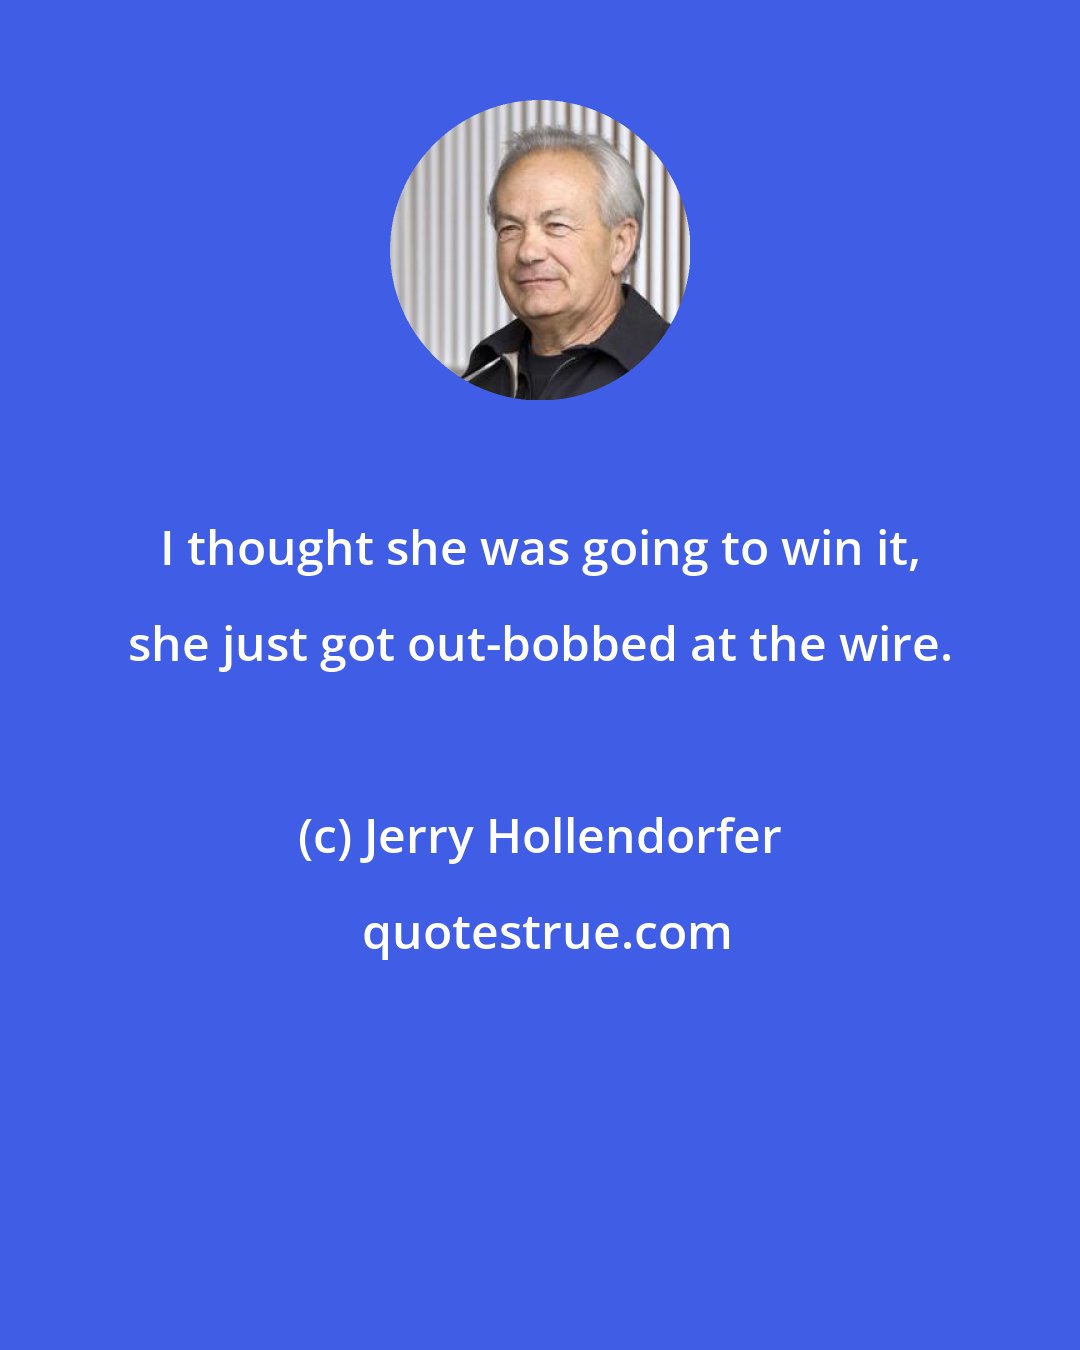 Jerry Hollendorfer: I thought she was going to win it, she just got out-bobbed at the wire.